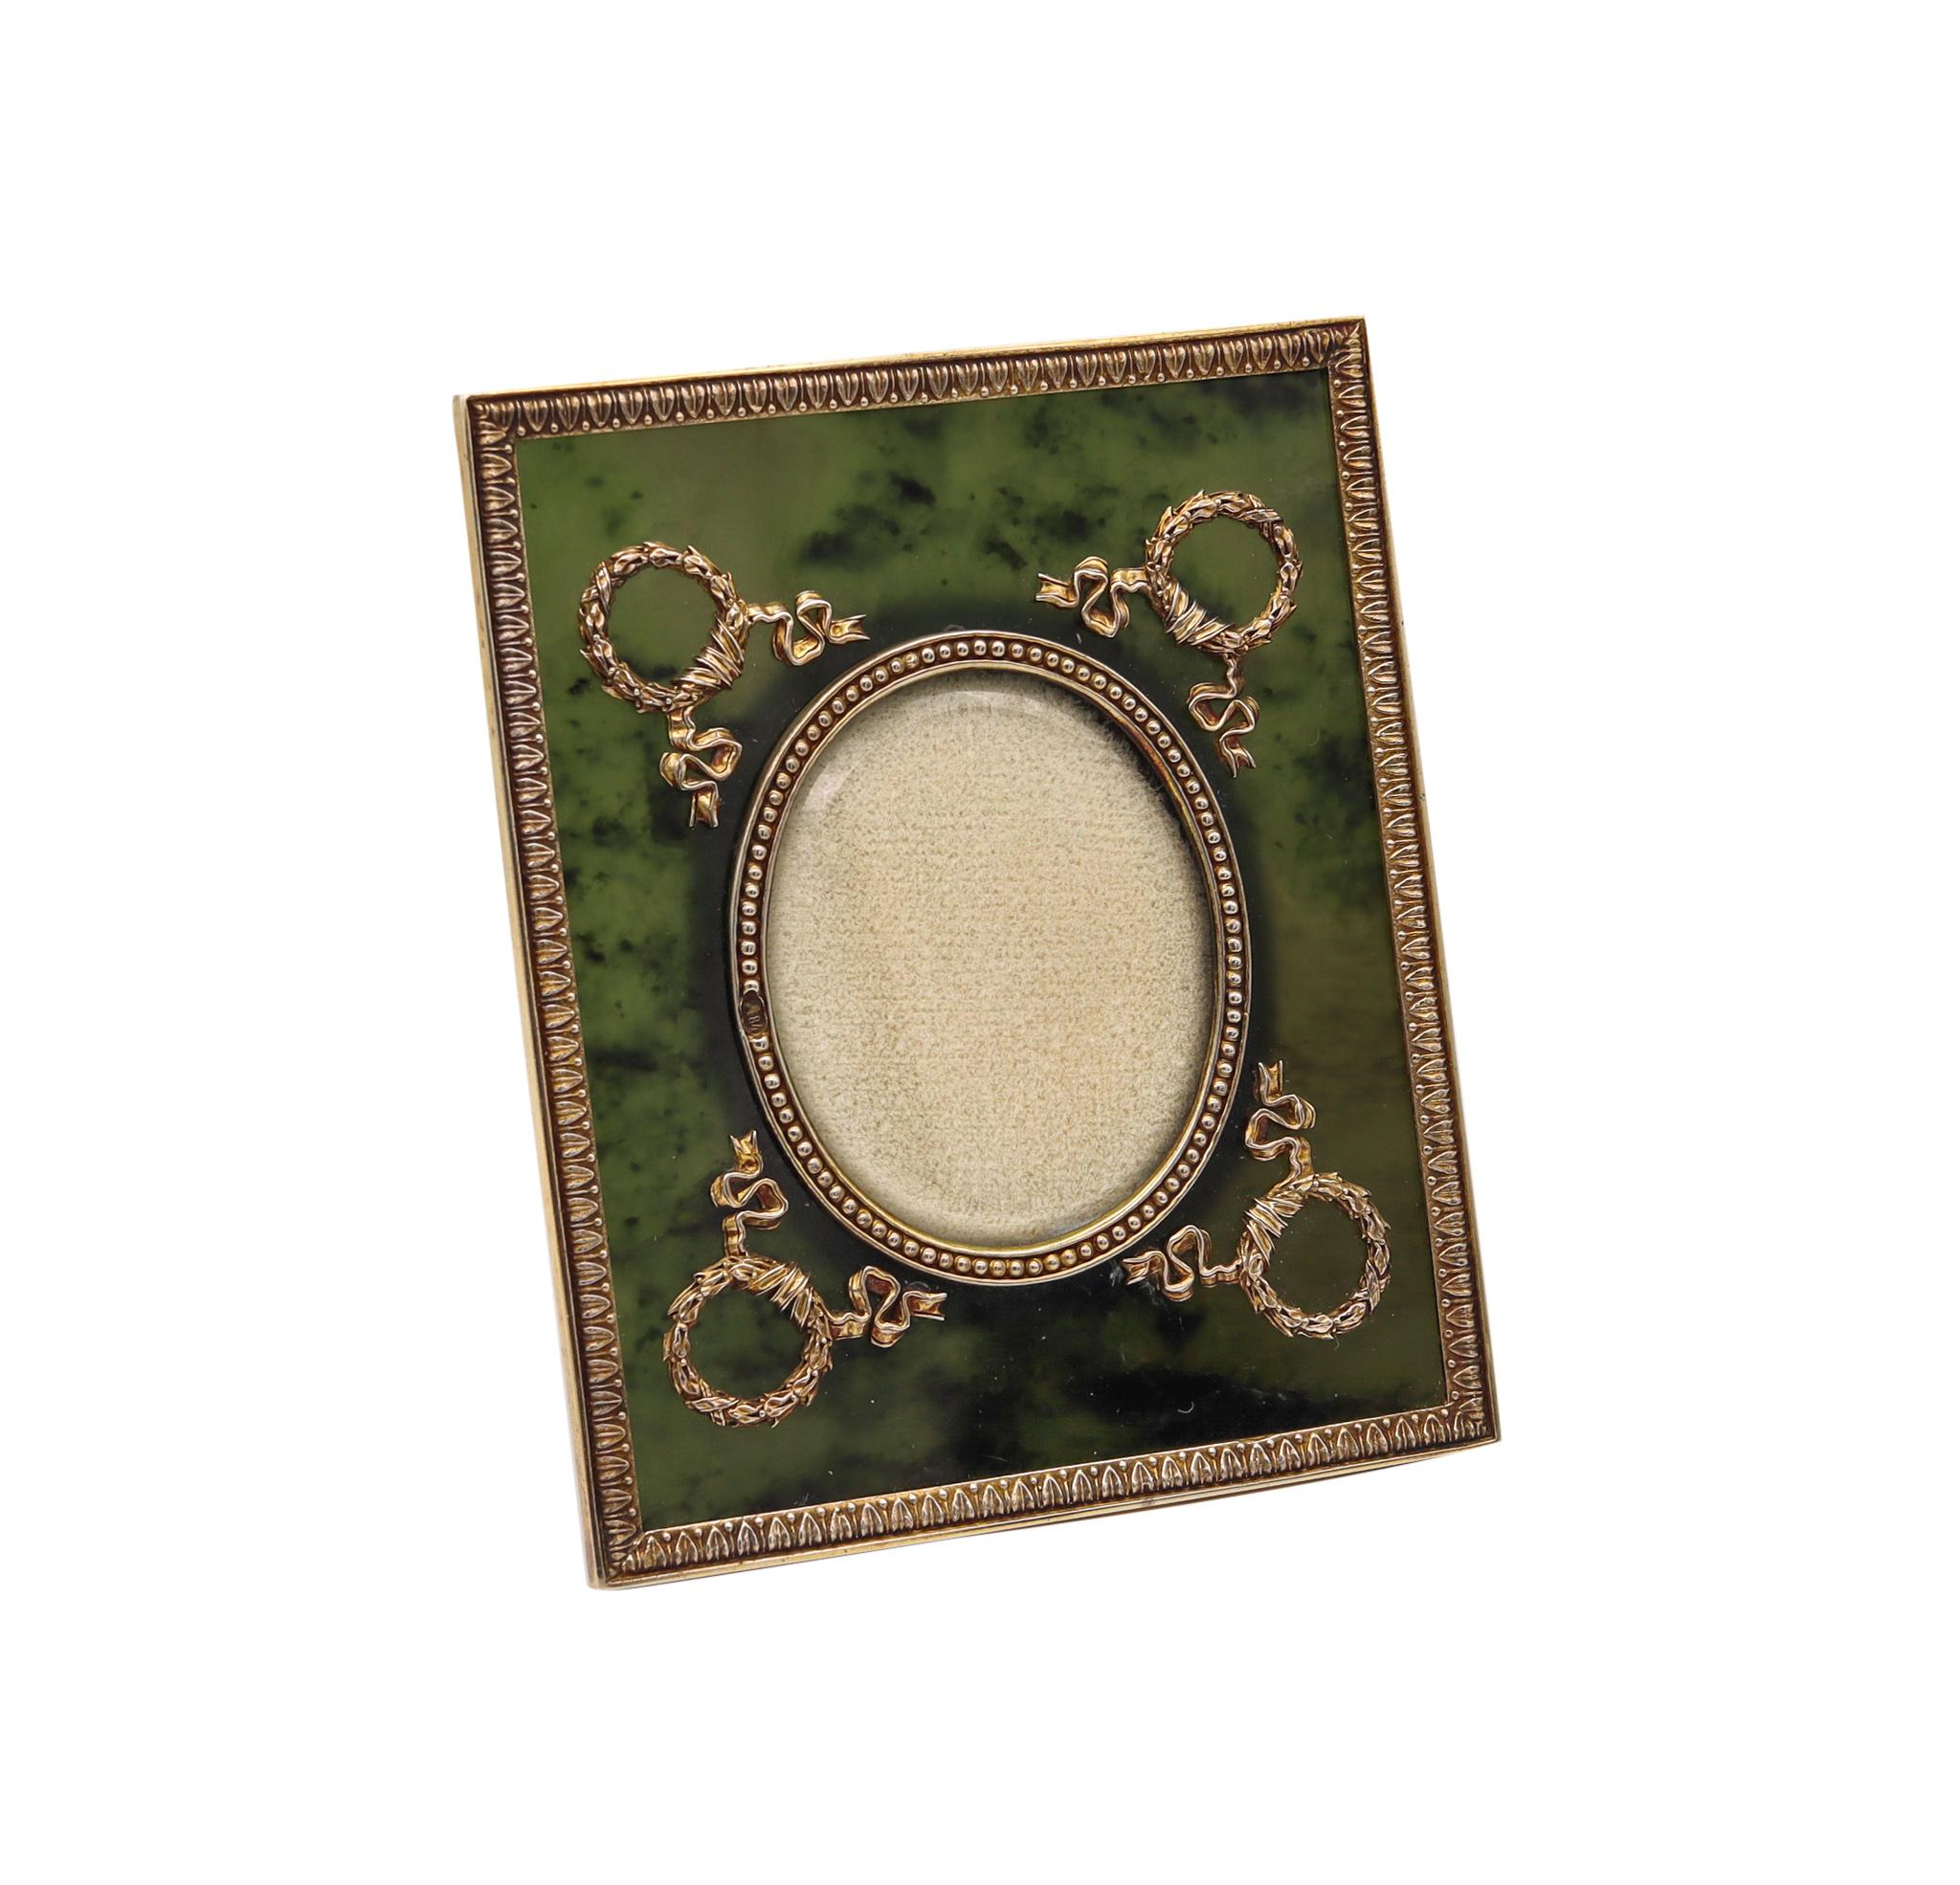 Russian 1915 Moscow Nephrite Jade Desk Picture Frame Mounted in Gilded Silver In Excellent Condition For Sale In Miami, FL